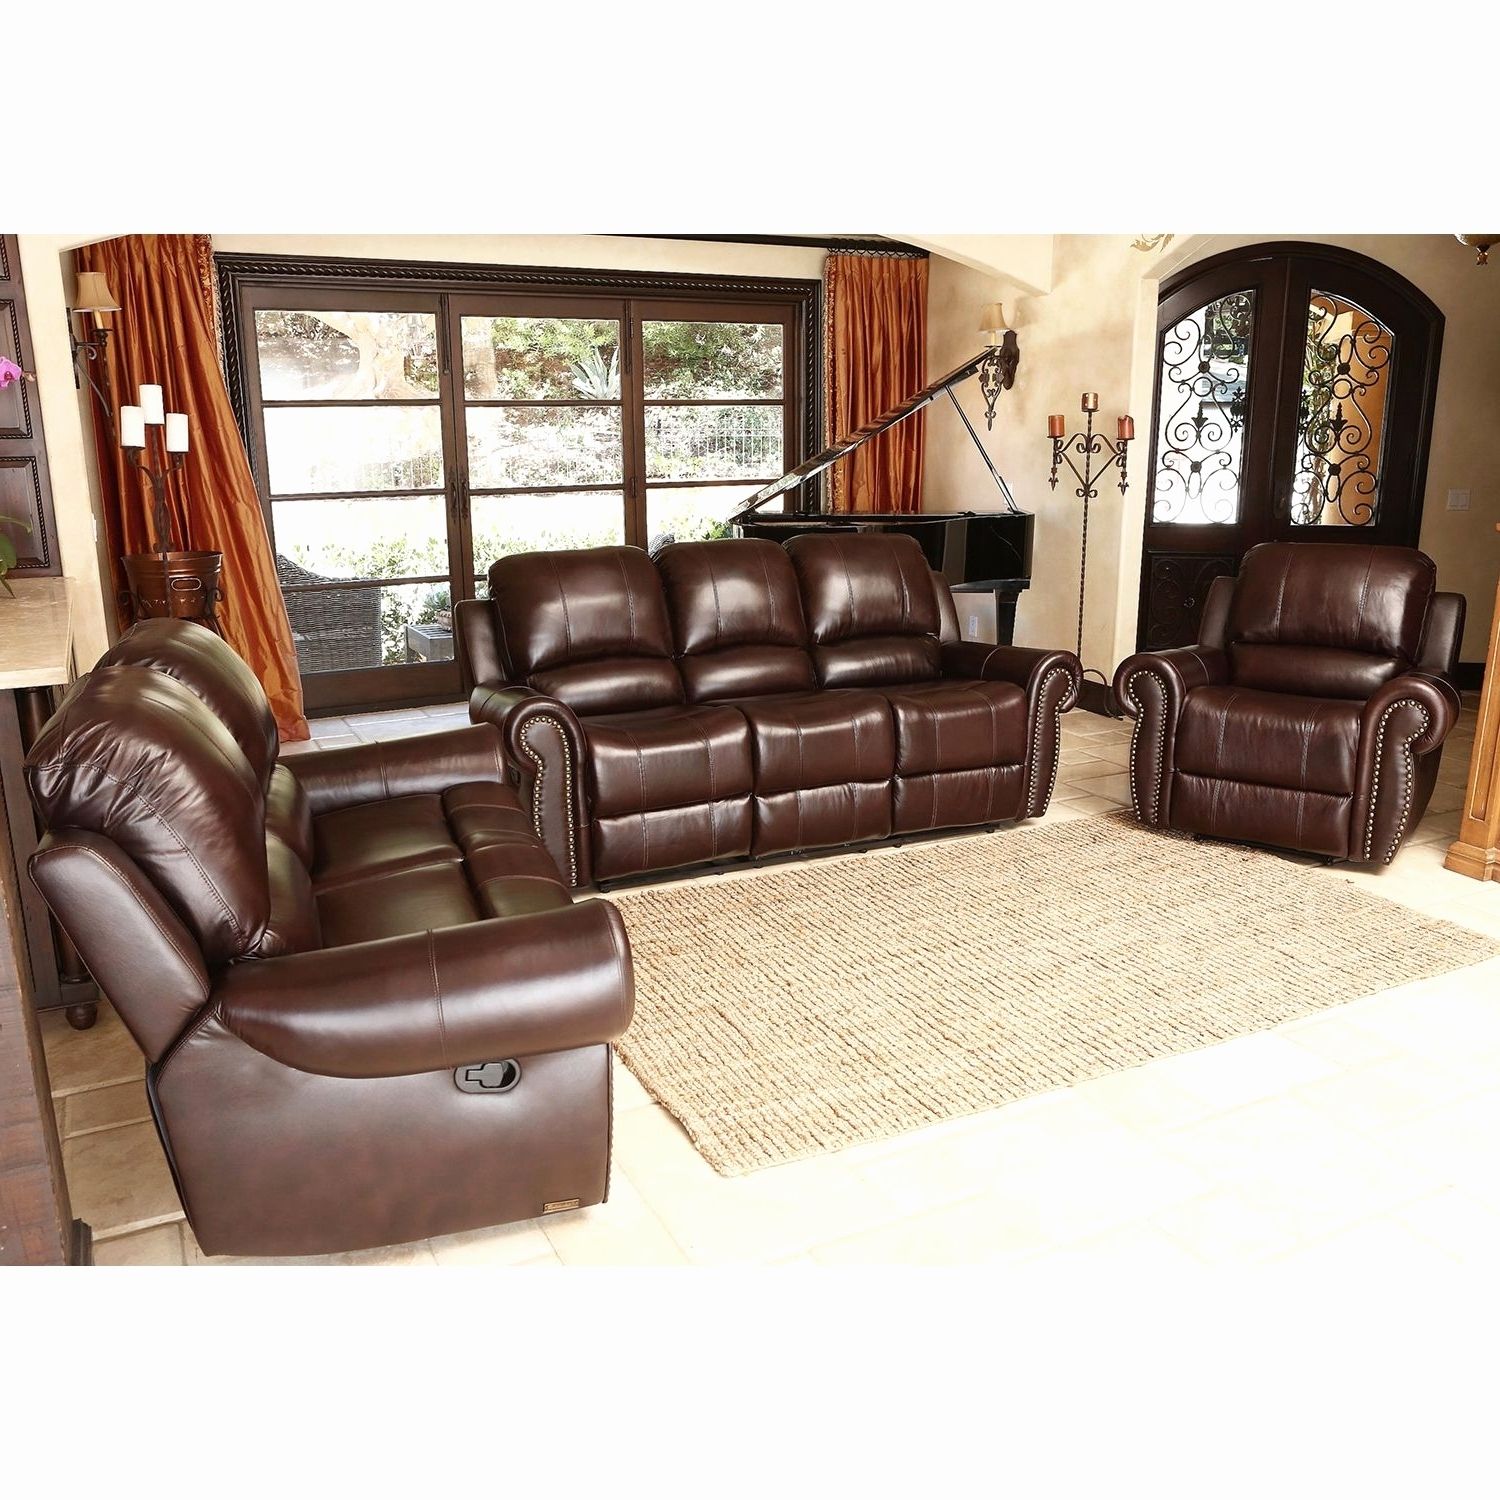 Preferred Sectional Sofas At Sam's Club Pertaining To Sam S Club Leather Sectional Sofa (View 17 of 20)